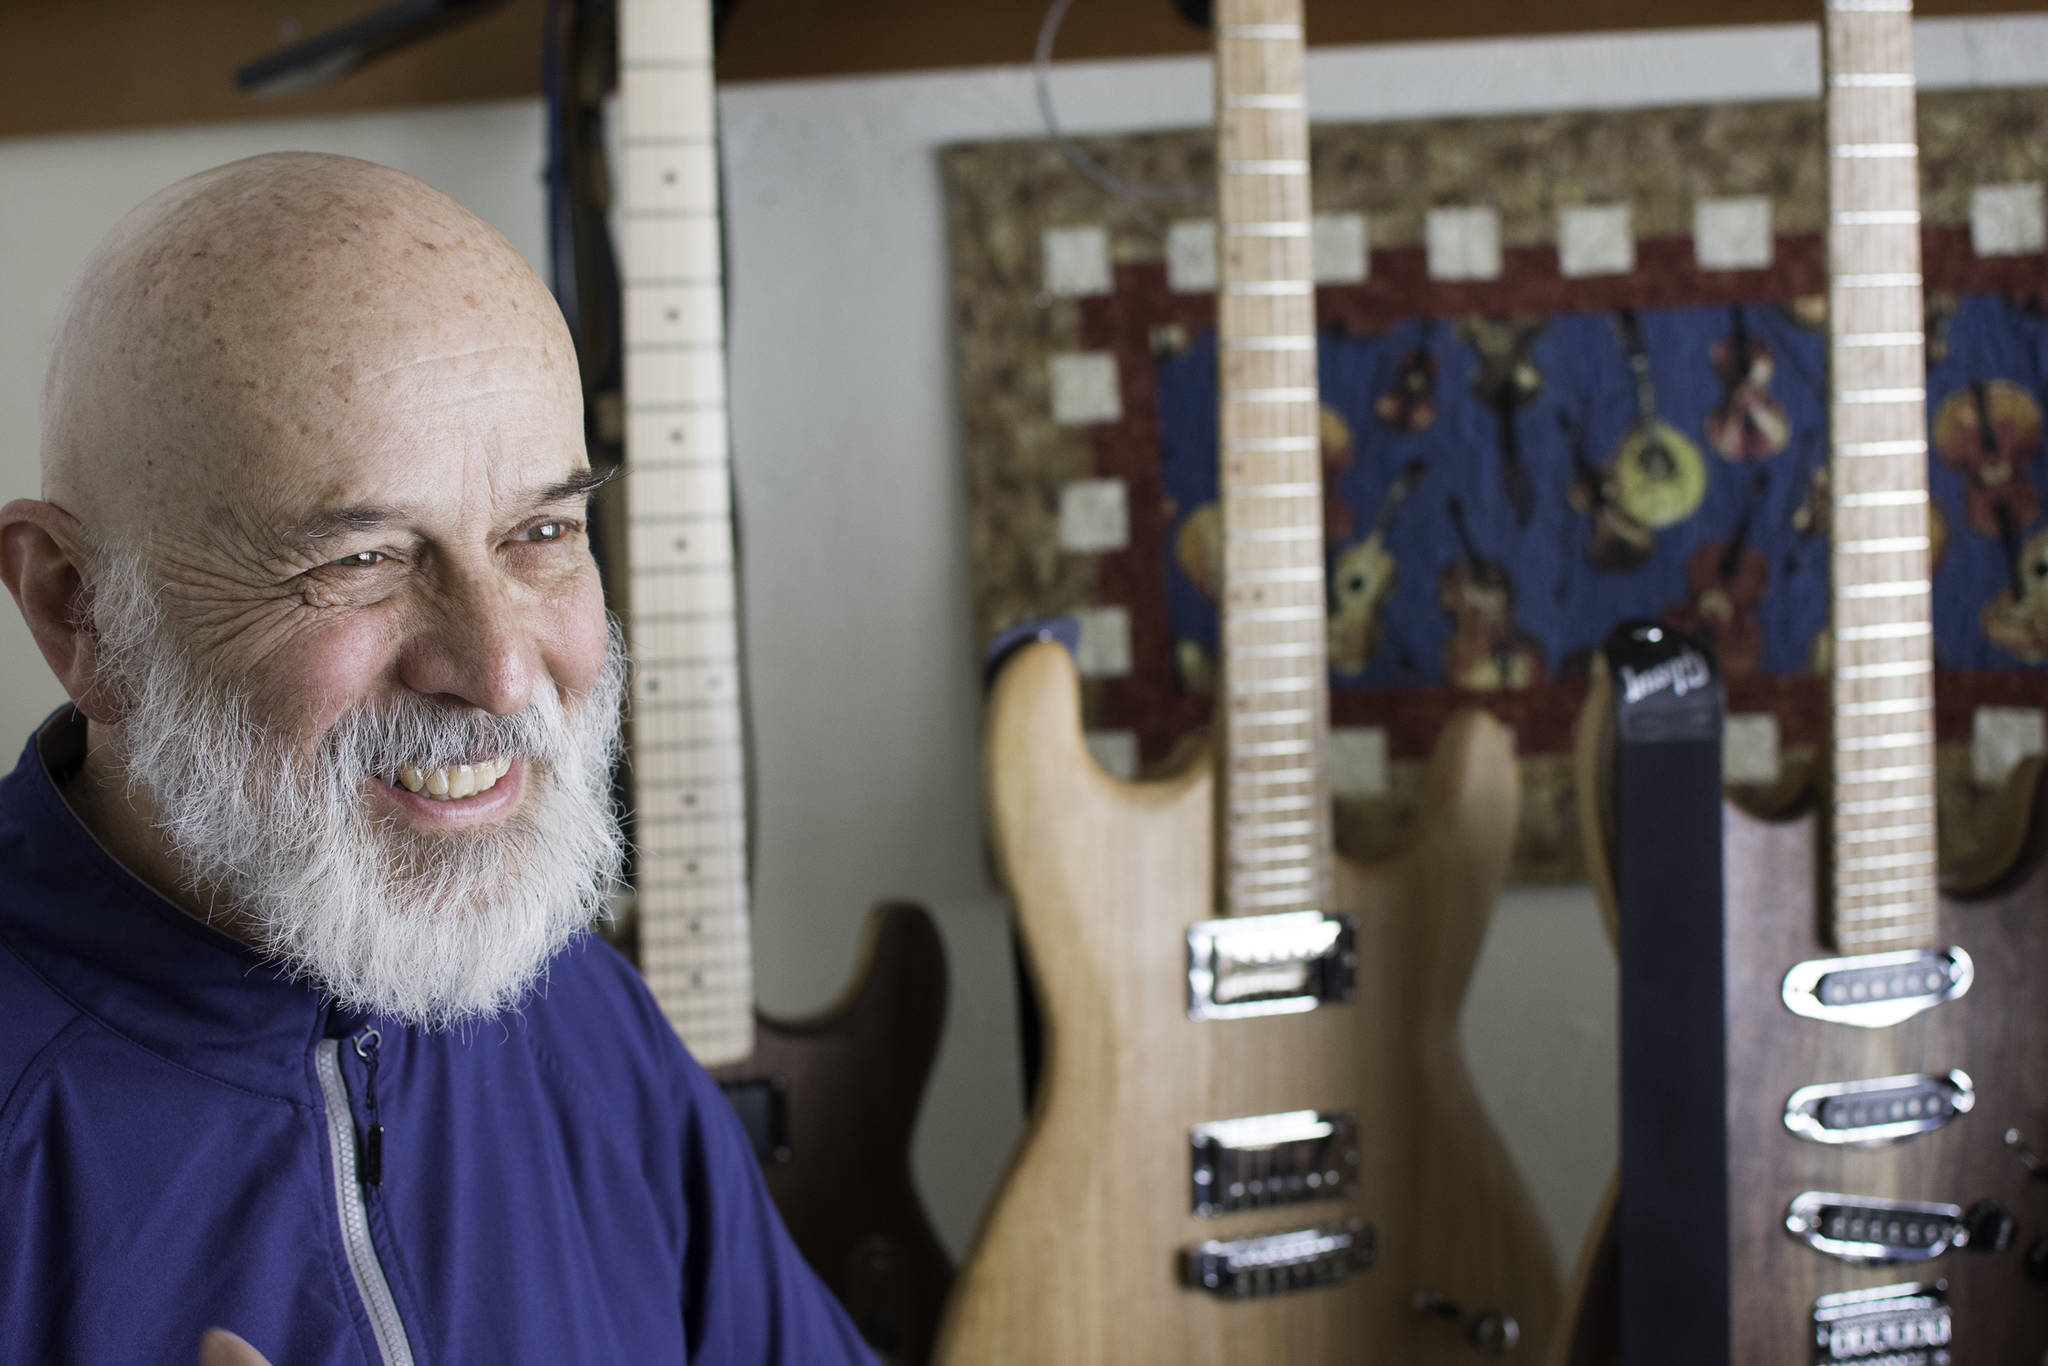 George Gress speaks with a reporter at his home in Juneau on Tuesday, March 27, 2018 about his three-year tenure making guitars for clients across the country. Richard McGrail | For the Capital City Weekly